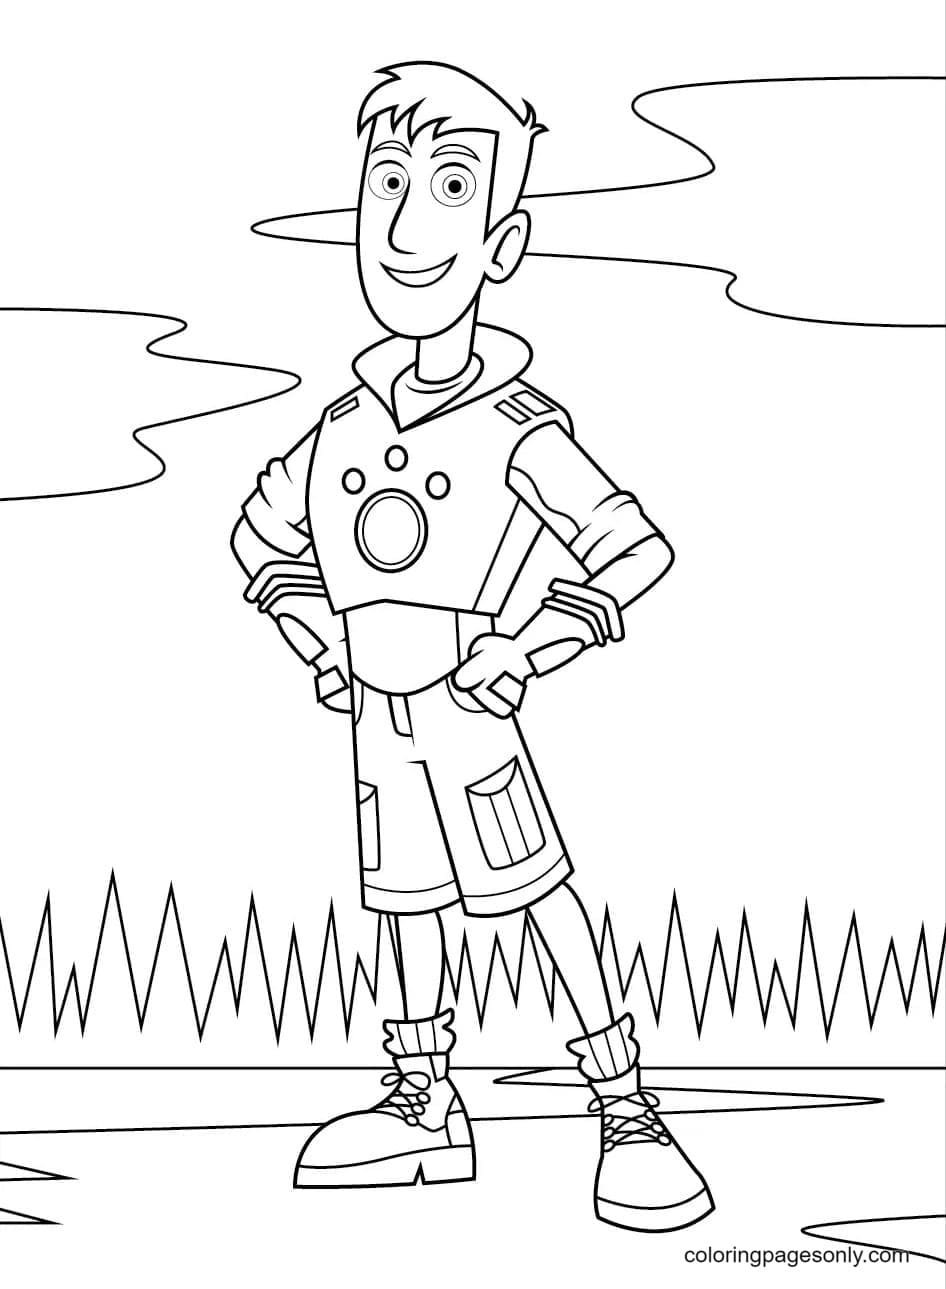 Wild kratts coloring pages printable for free download